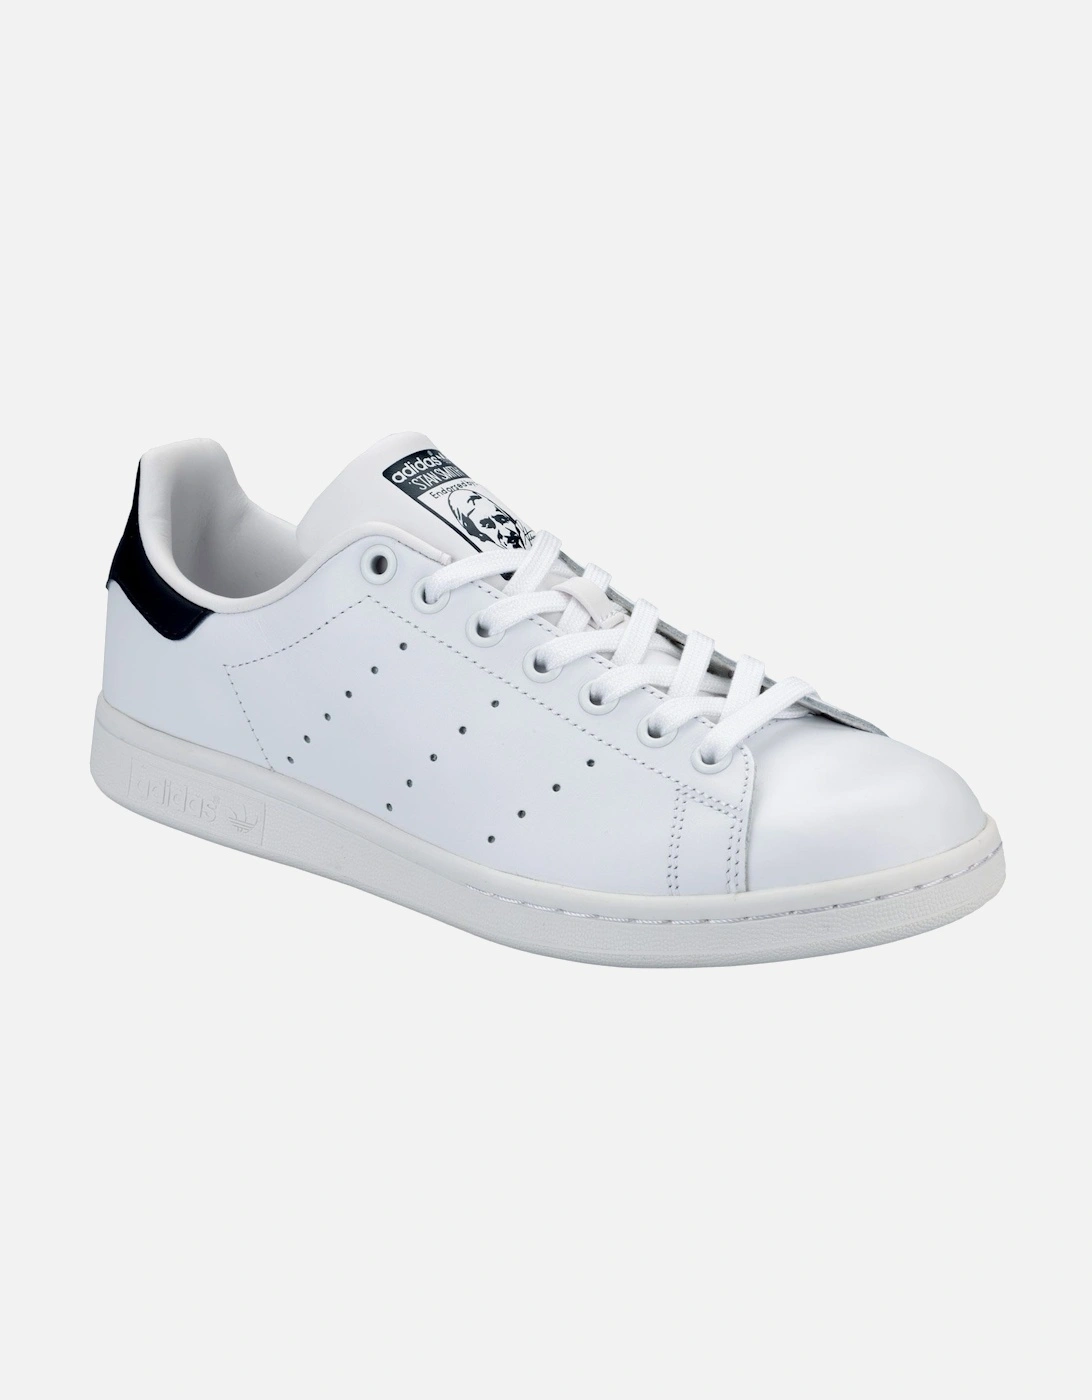 Women's Stan Smith Trainers - Womens Stan Smith Trainers - White- [Size: UK 7.5 only]